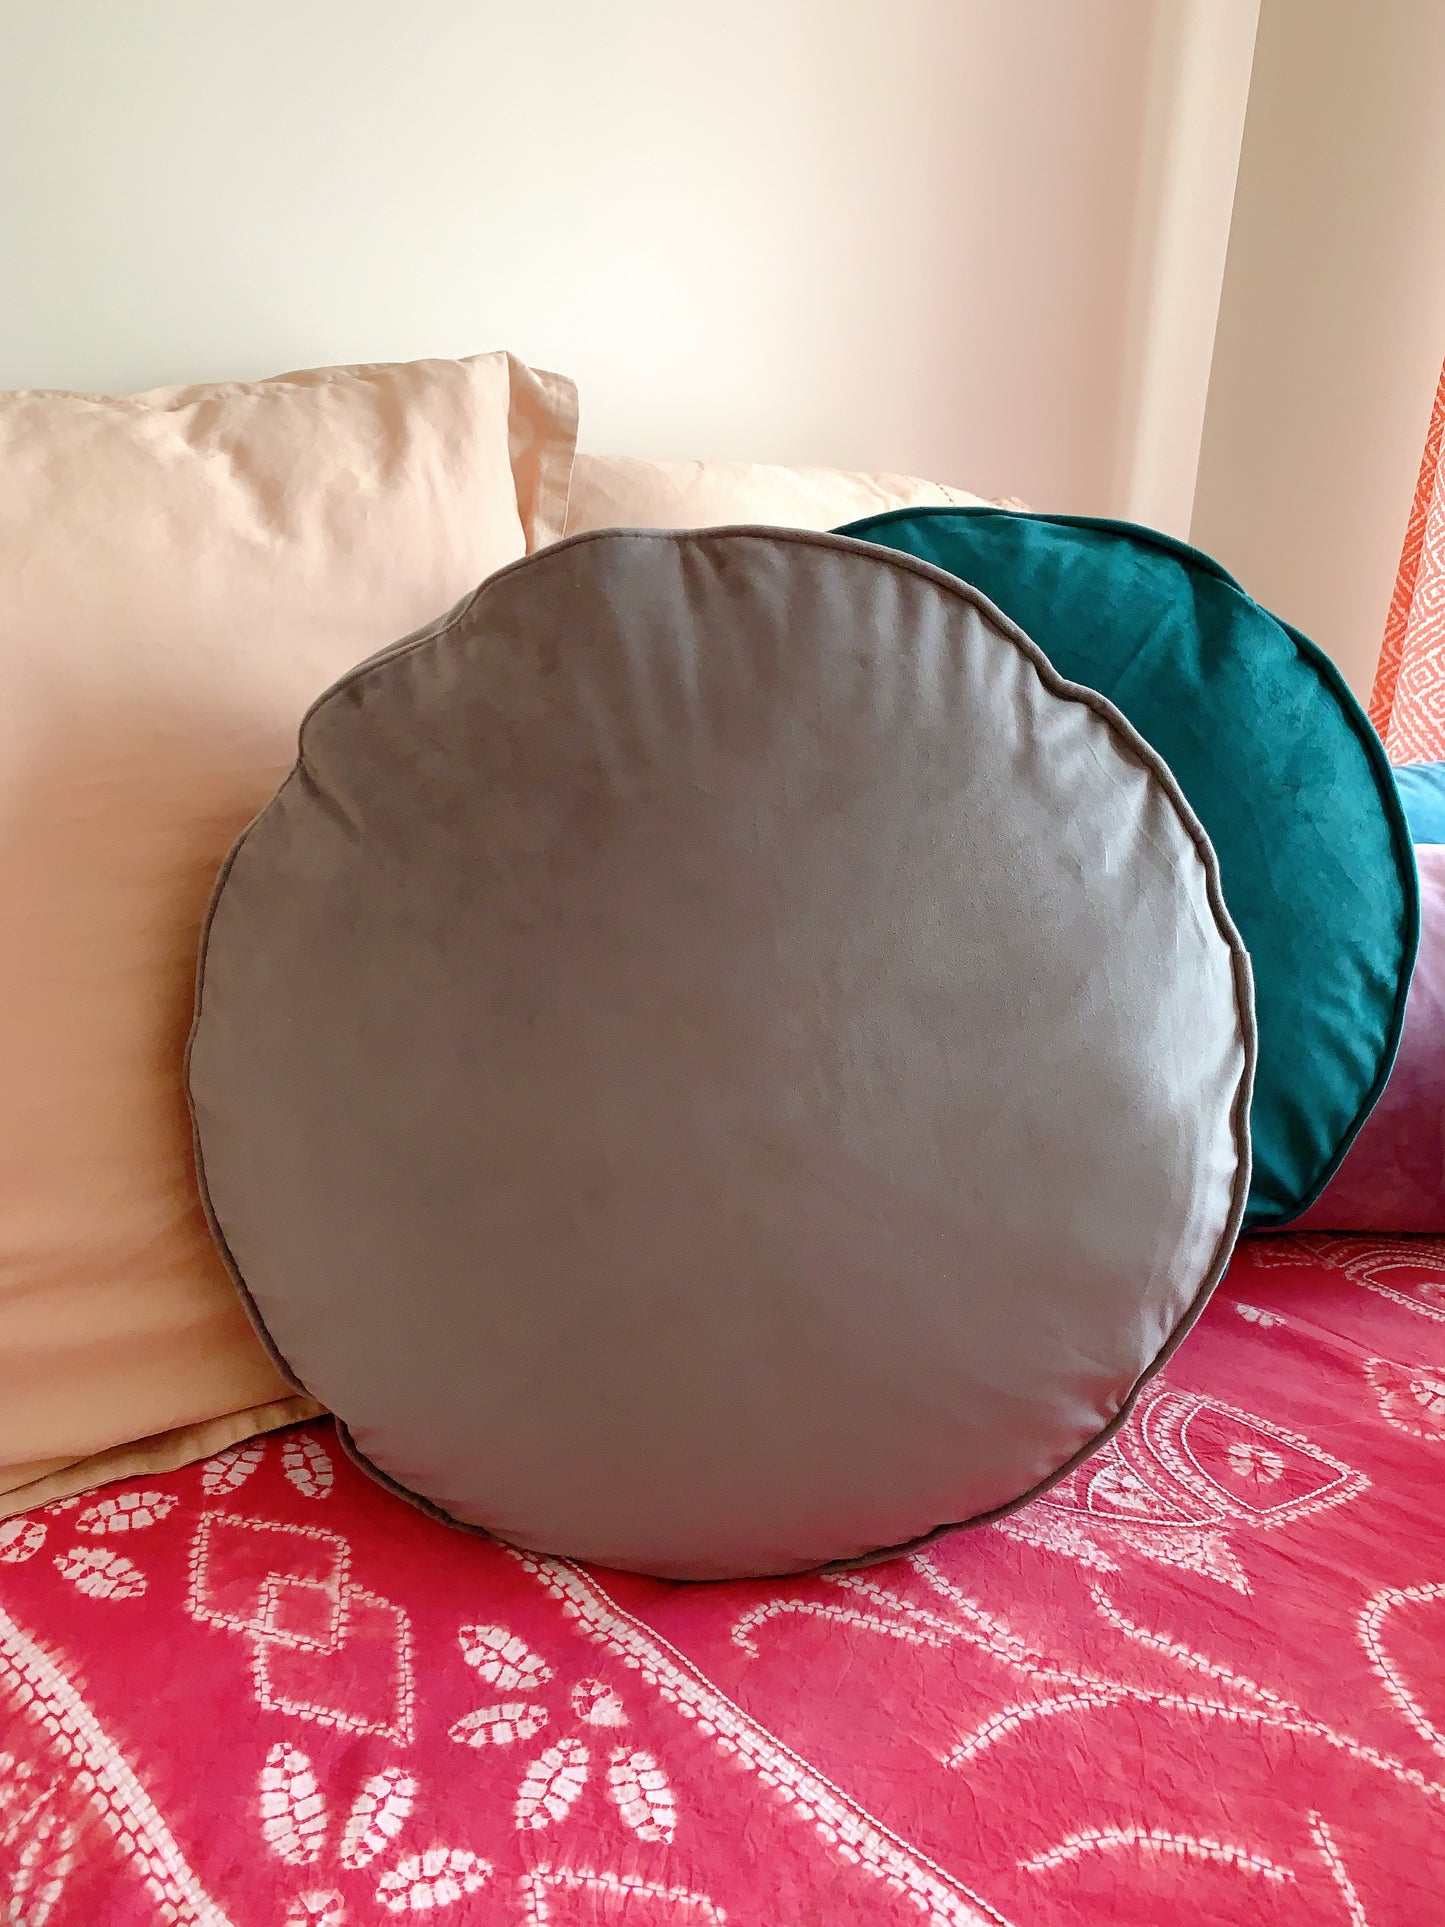 Silver Grey Luxury Velvet Cushion Cover, 20” Round Pillow Cover, Decorative Throw Pillow Scatter Cushion